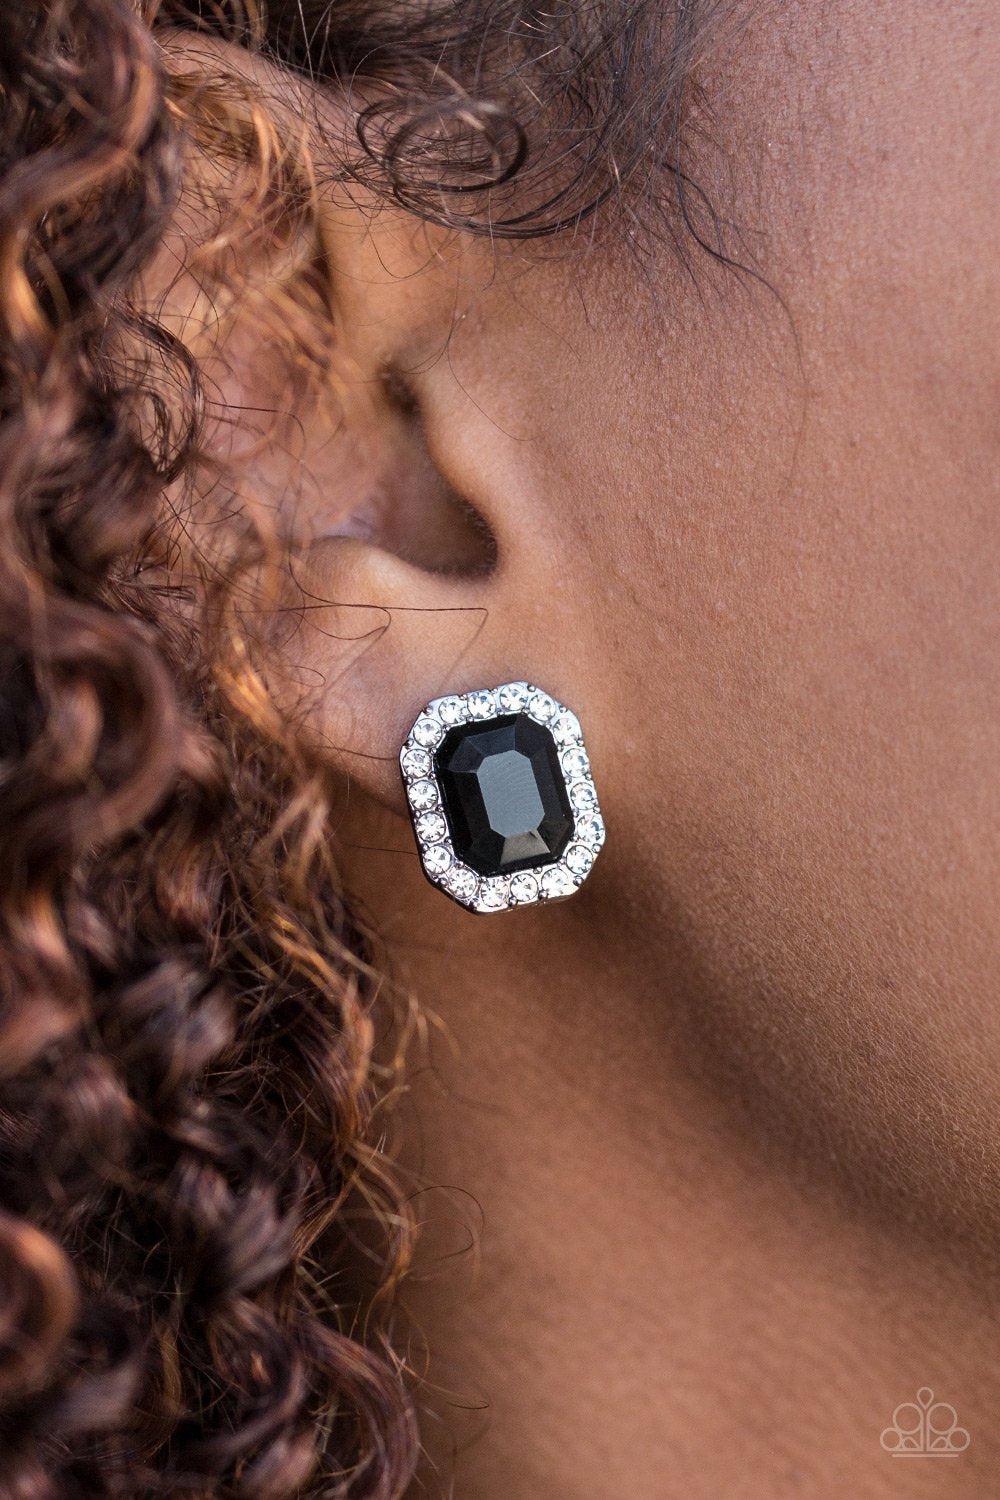 Bride Squad Black and White Rhinestone Post Earrings - Paparazzi Accessories- model - CarasShop.com - $5 Jewelry by Cara Jewels